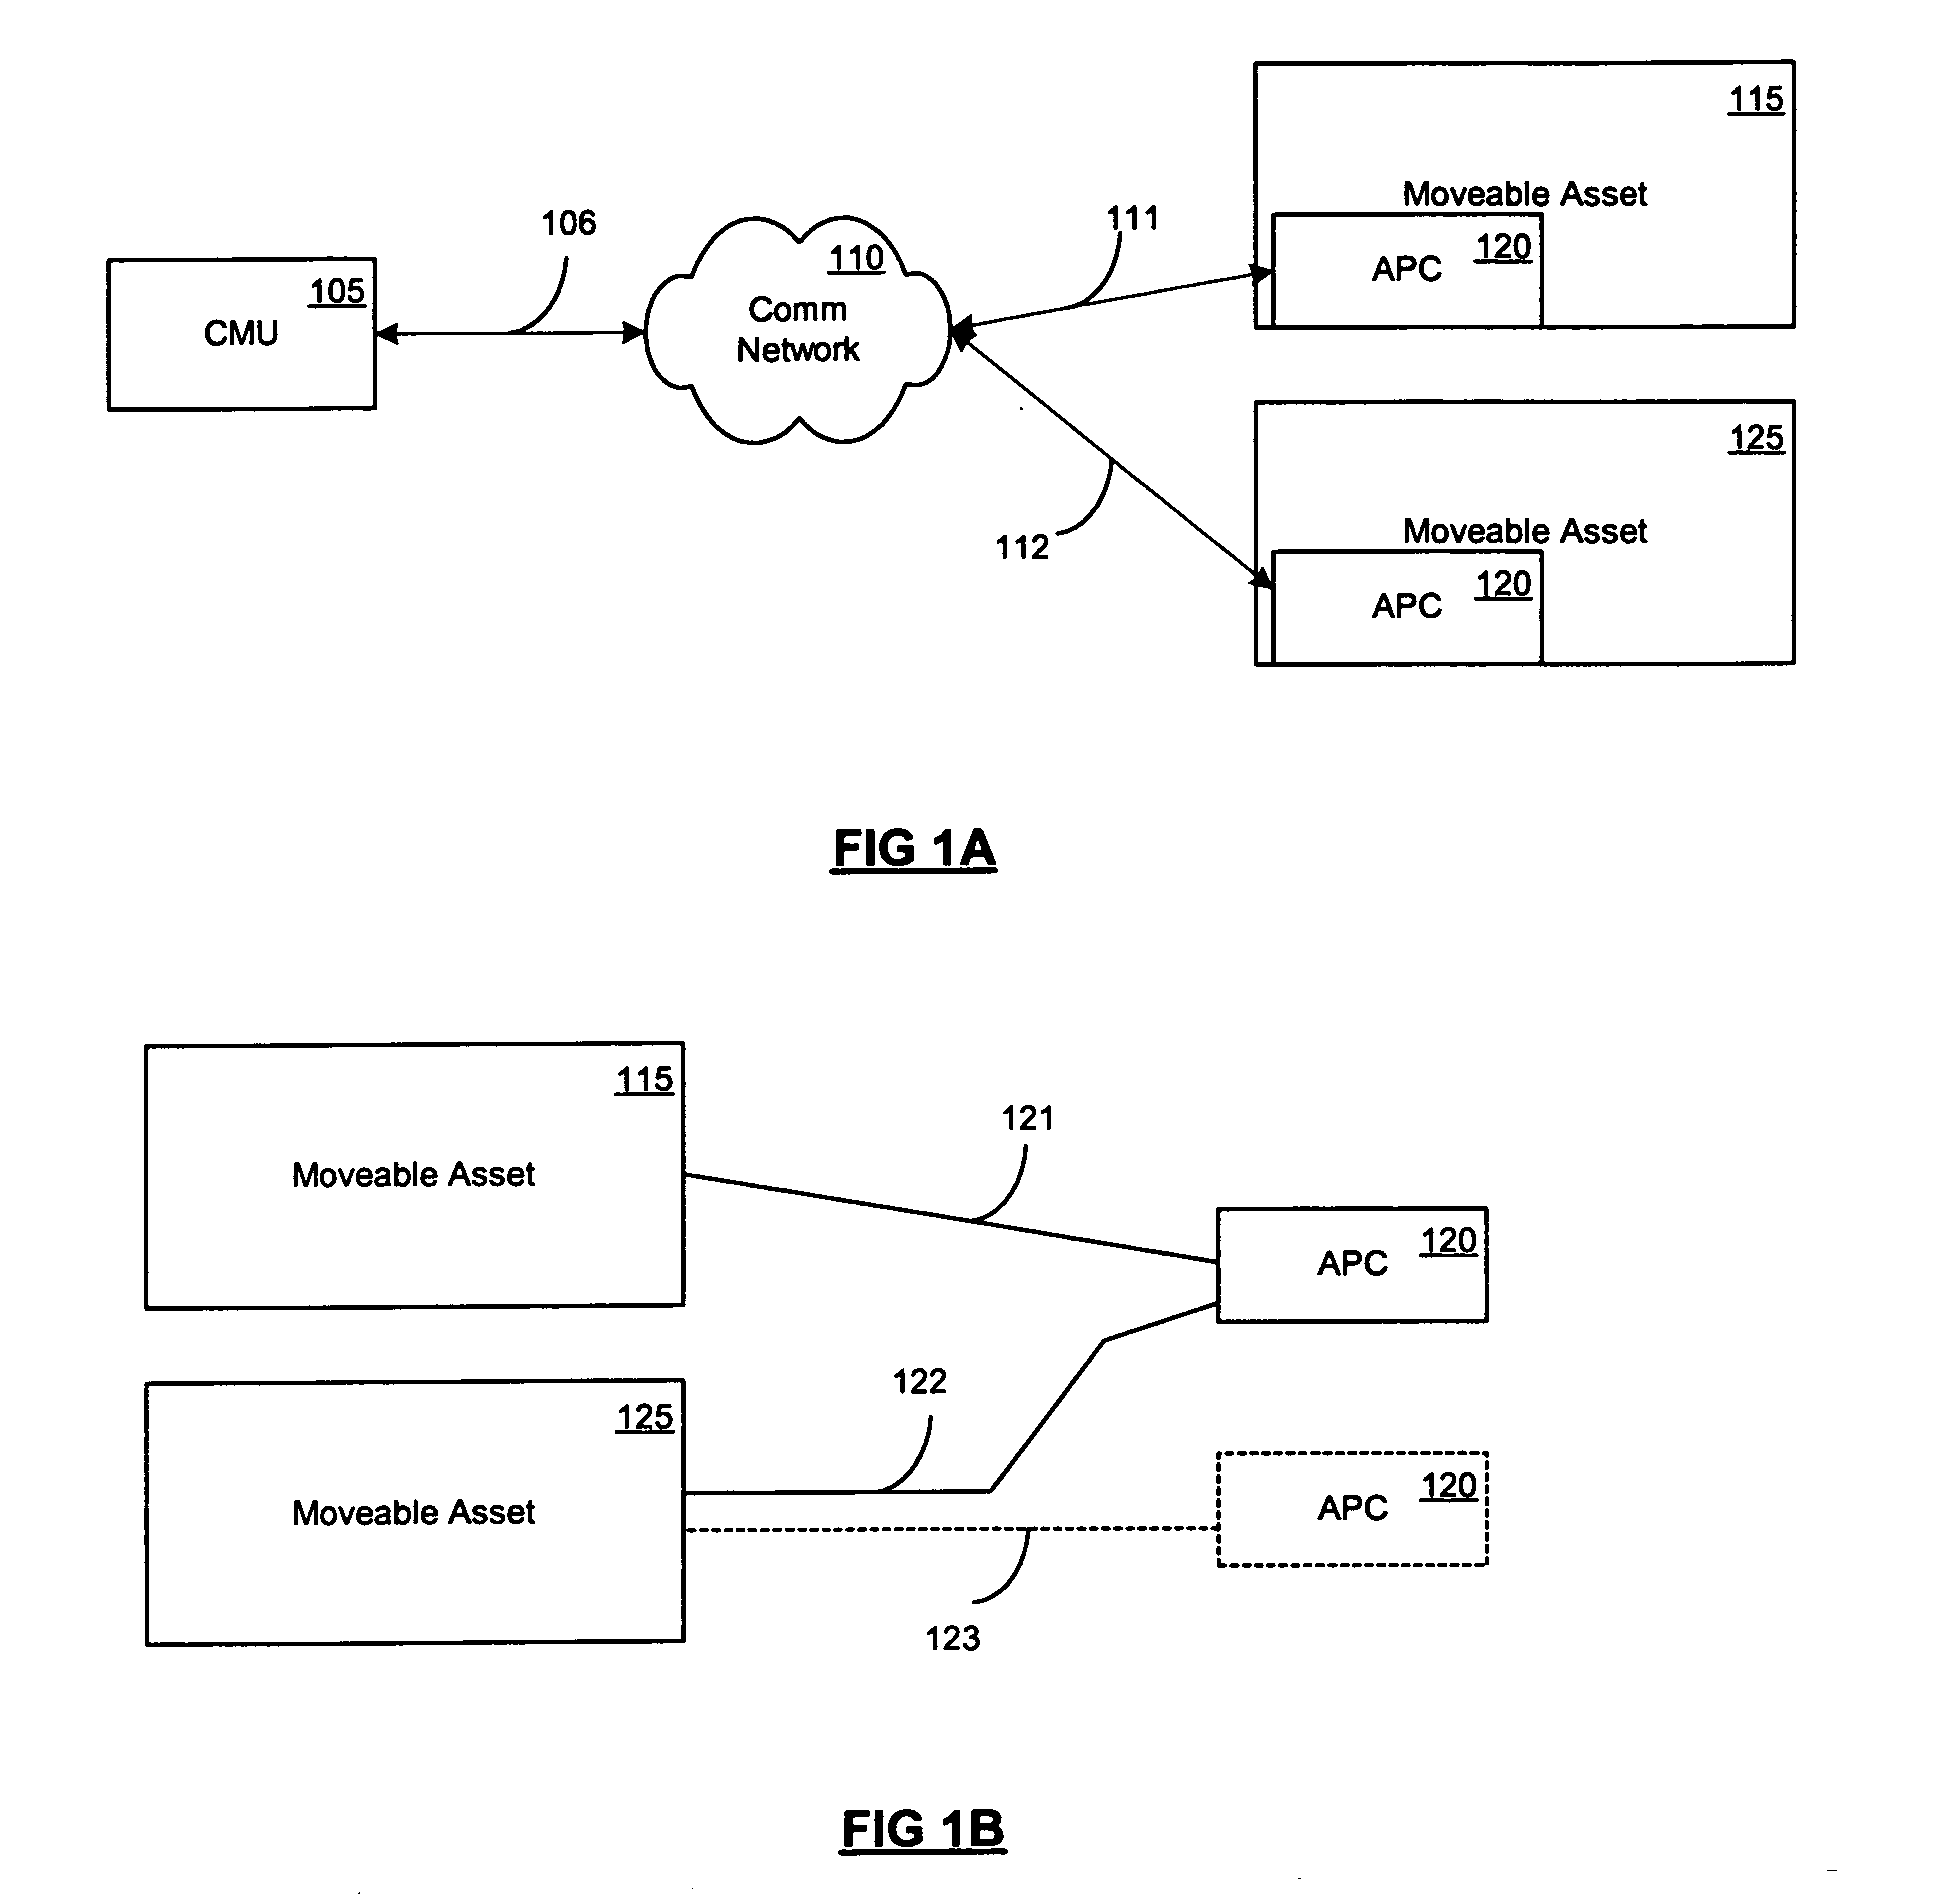 Security/monitoring electronic assembly for computers and assets